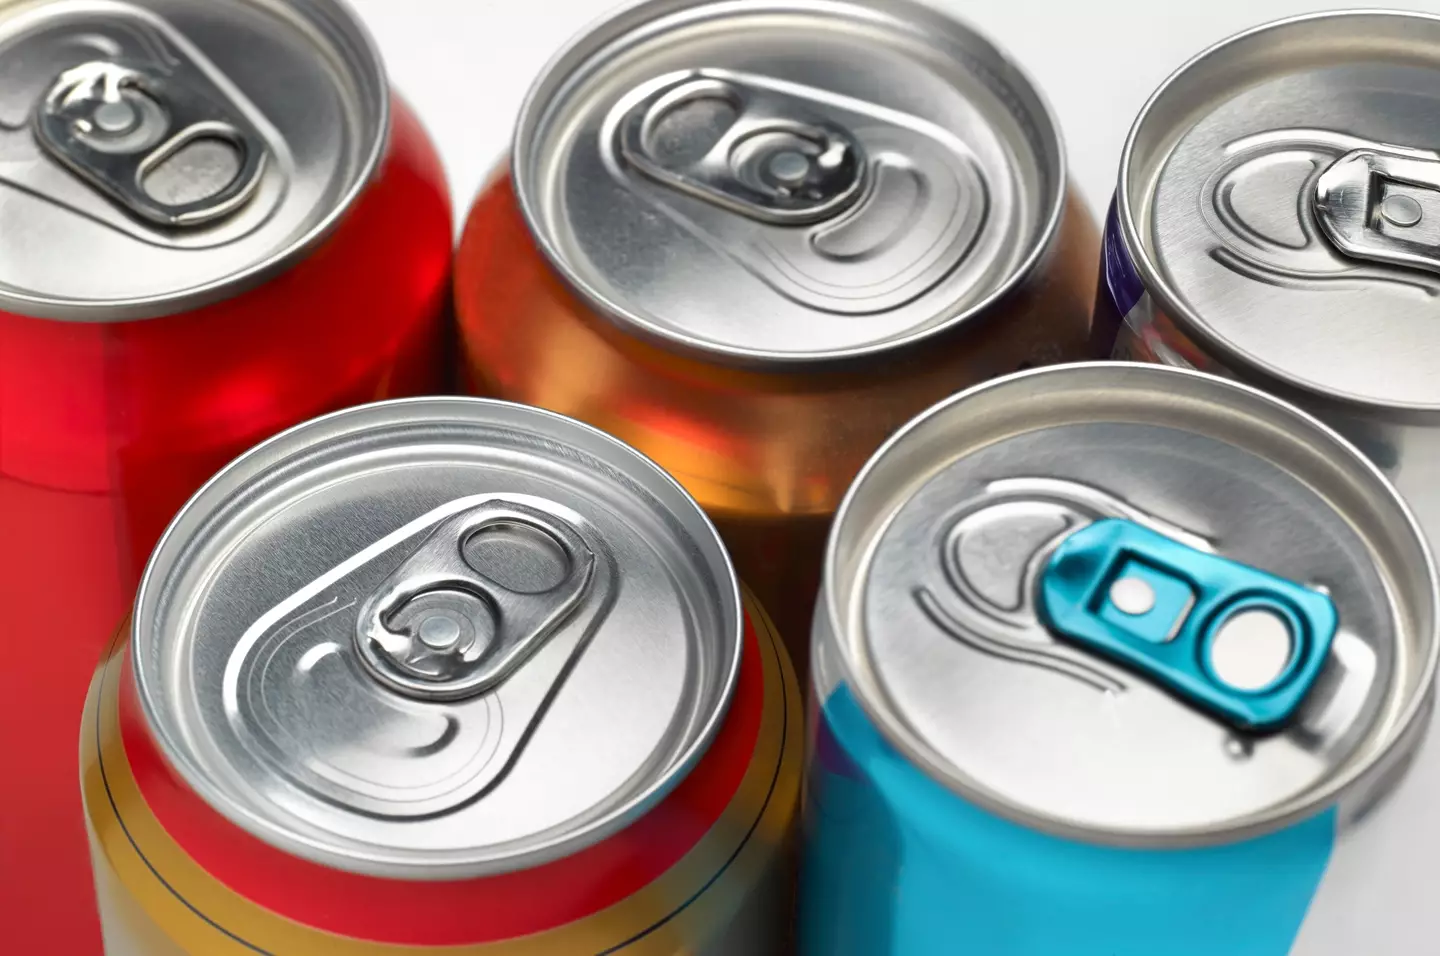 Experts say the 'best drink option' is water rather than cans of pop.